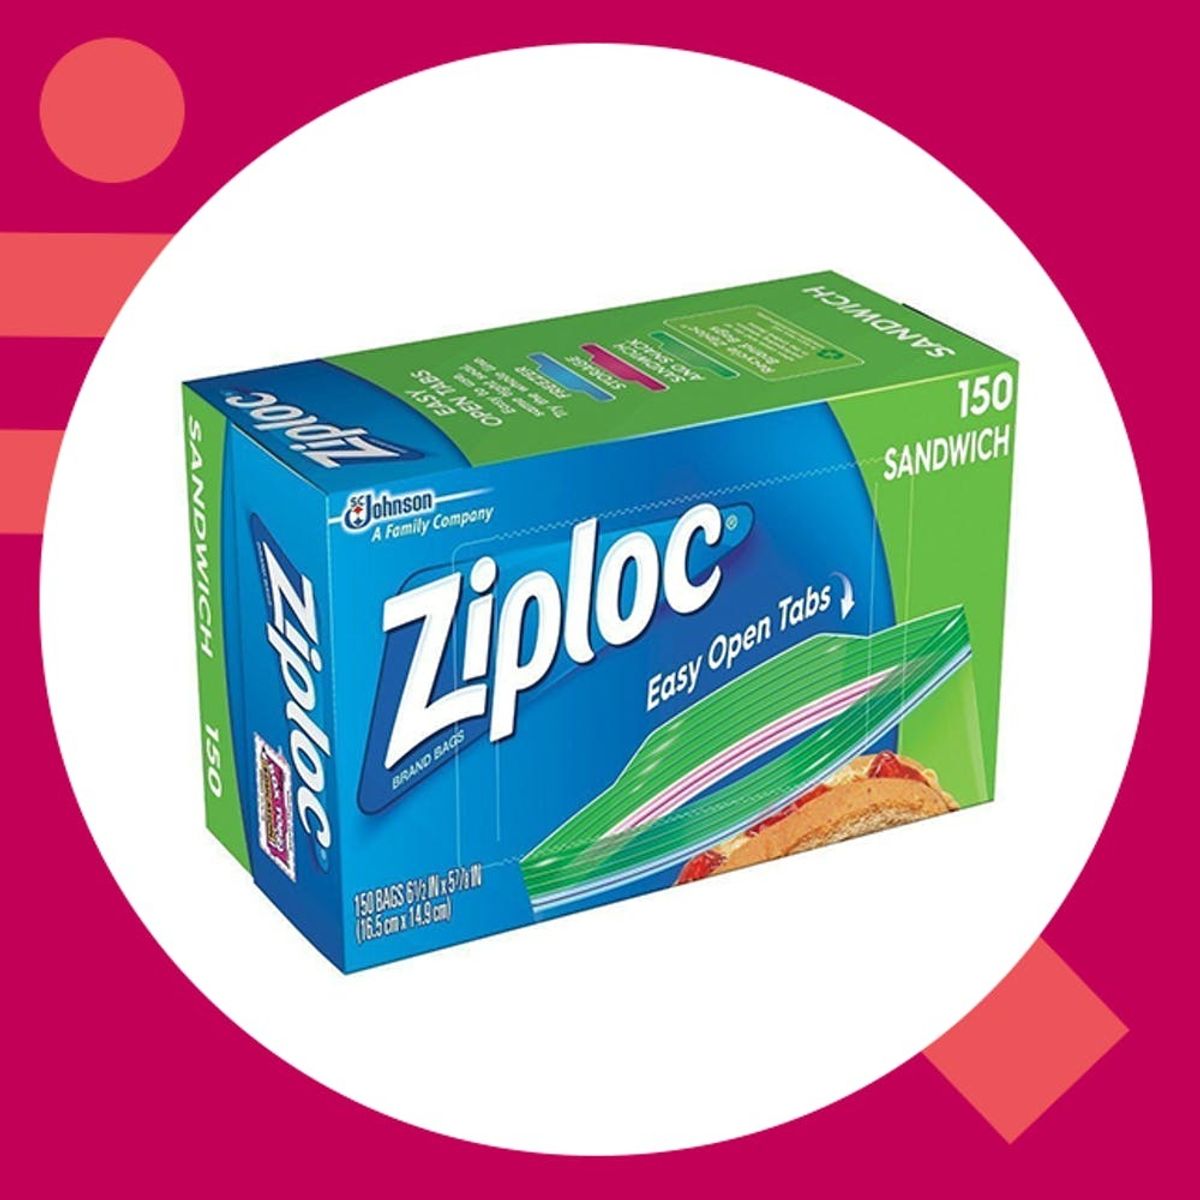 Ziploc Now Has a Clothing Line and Yes, It’s Clear-ly Amazing